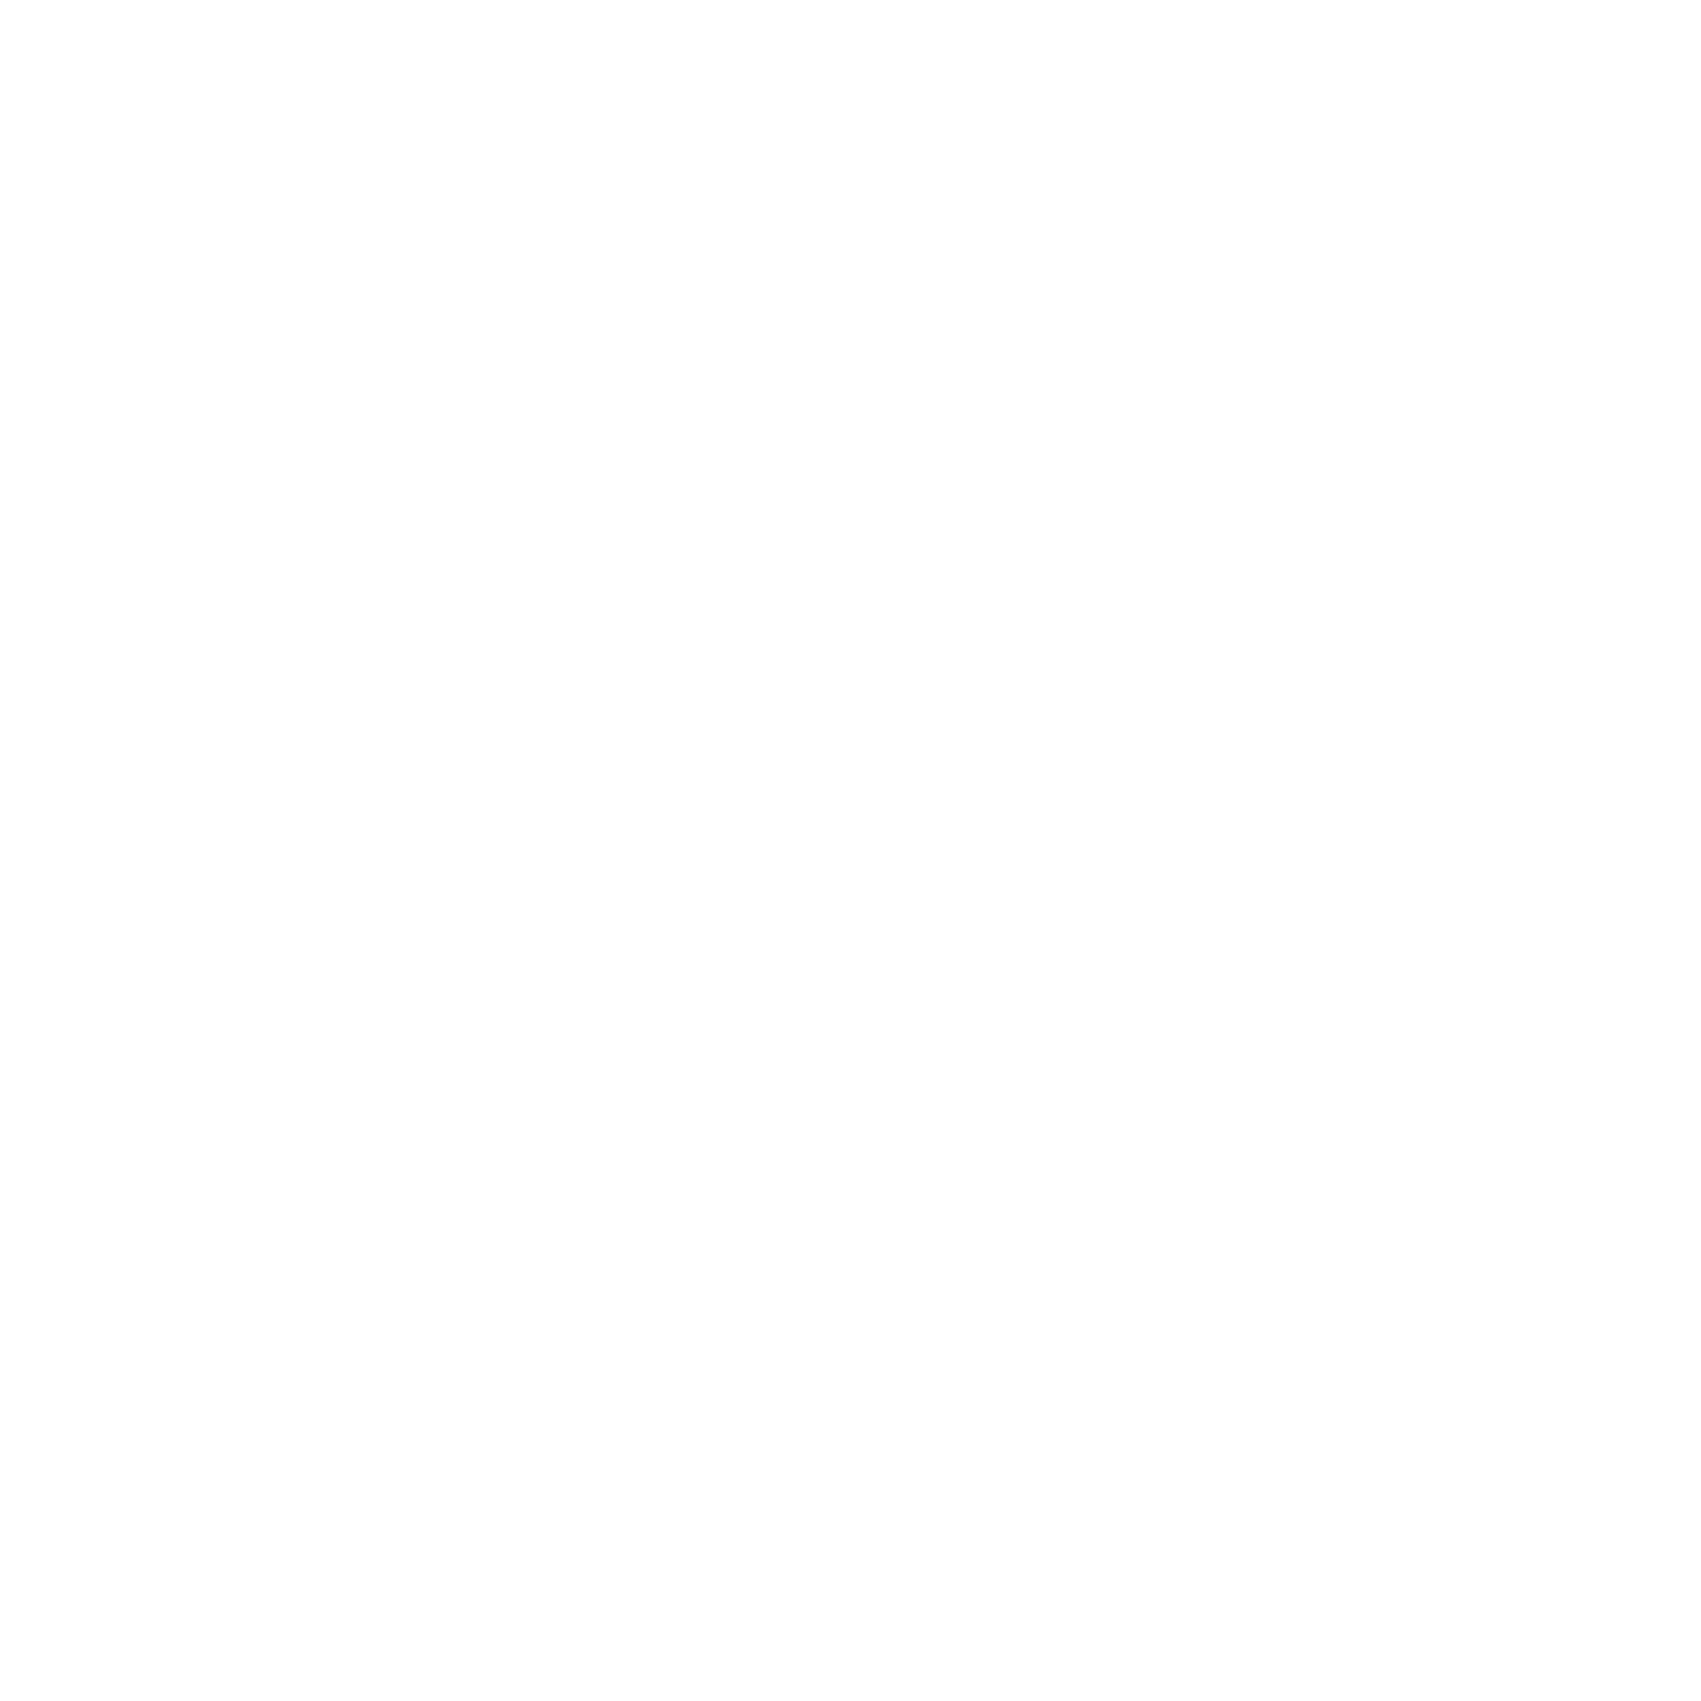 Scout Fleur-de-lis symbol and text: '5th Spen Valley West Yorkshire' all in white